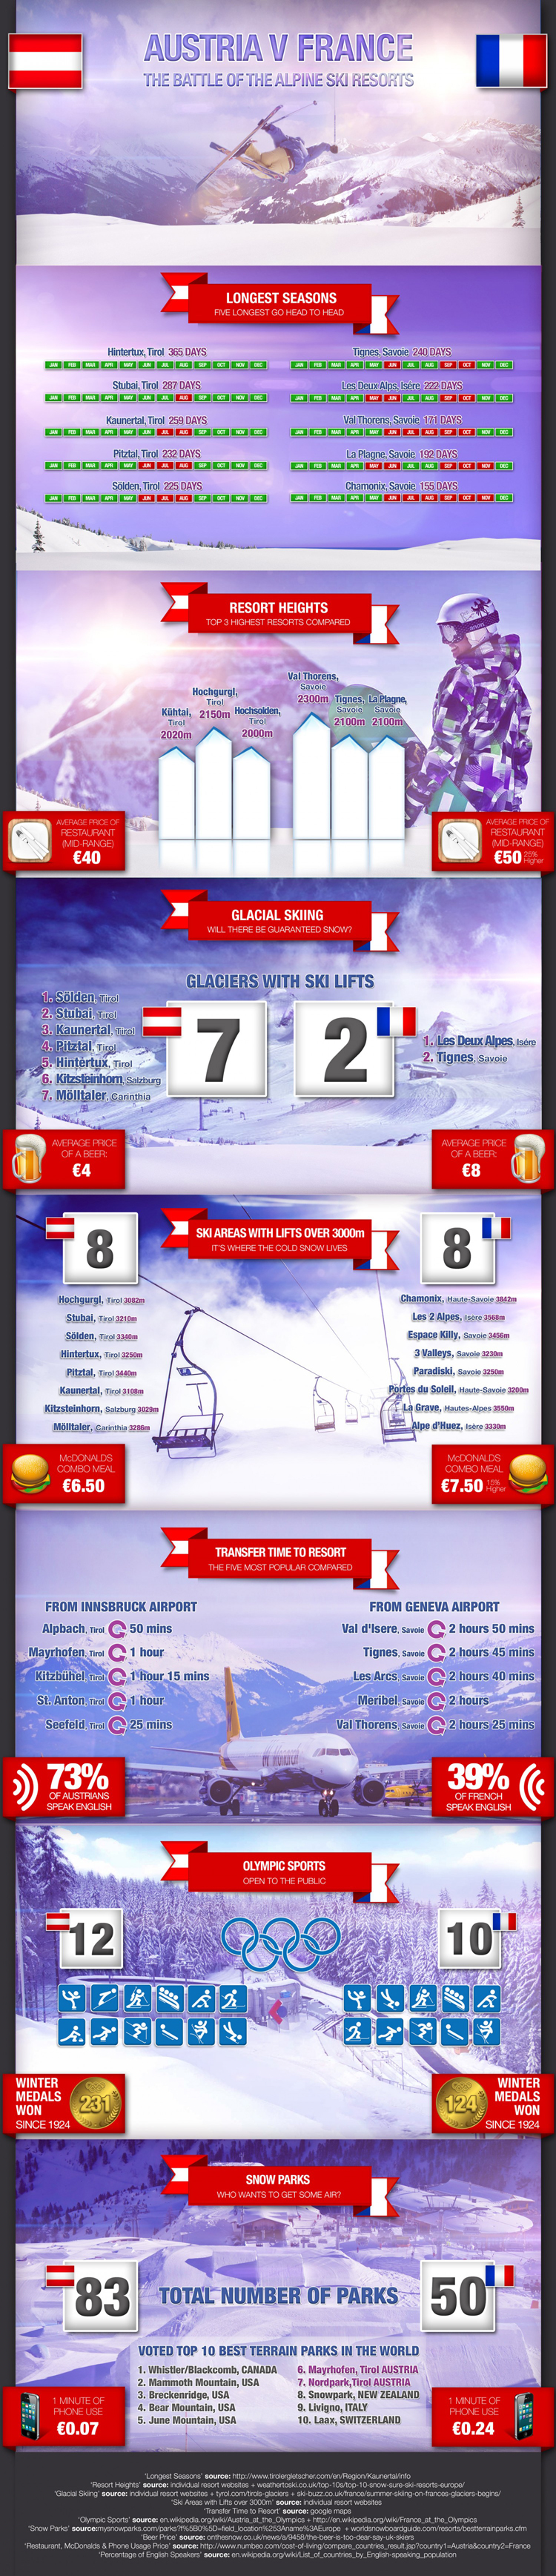 austria-v-france-how-the-skiing-and-snowboarding-stack-up_541c0ccf44db6_w750